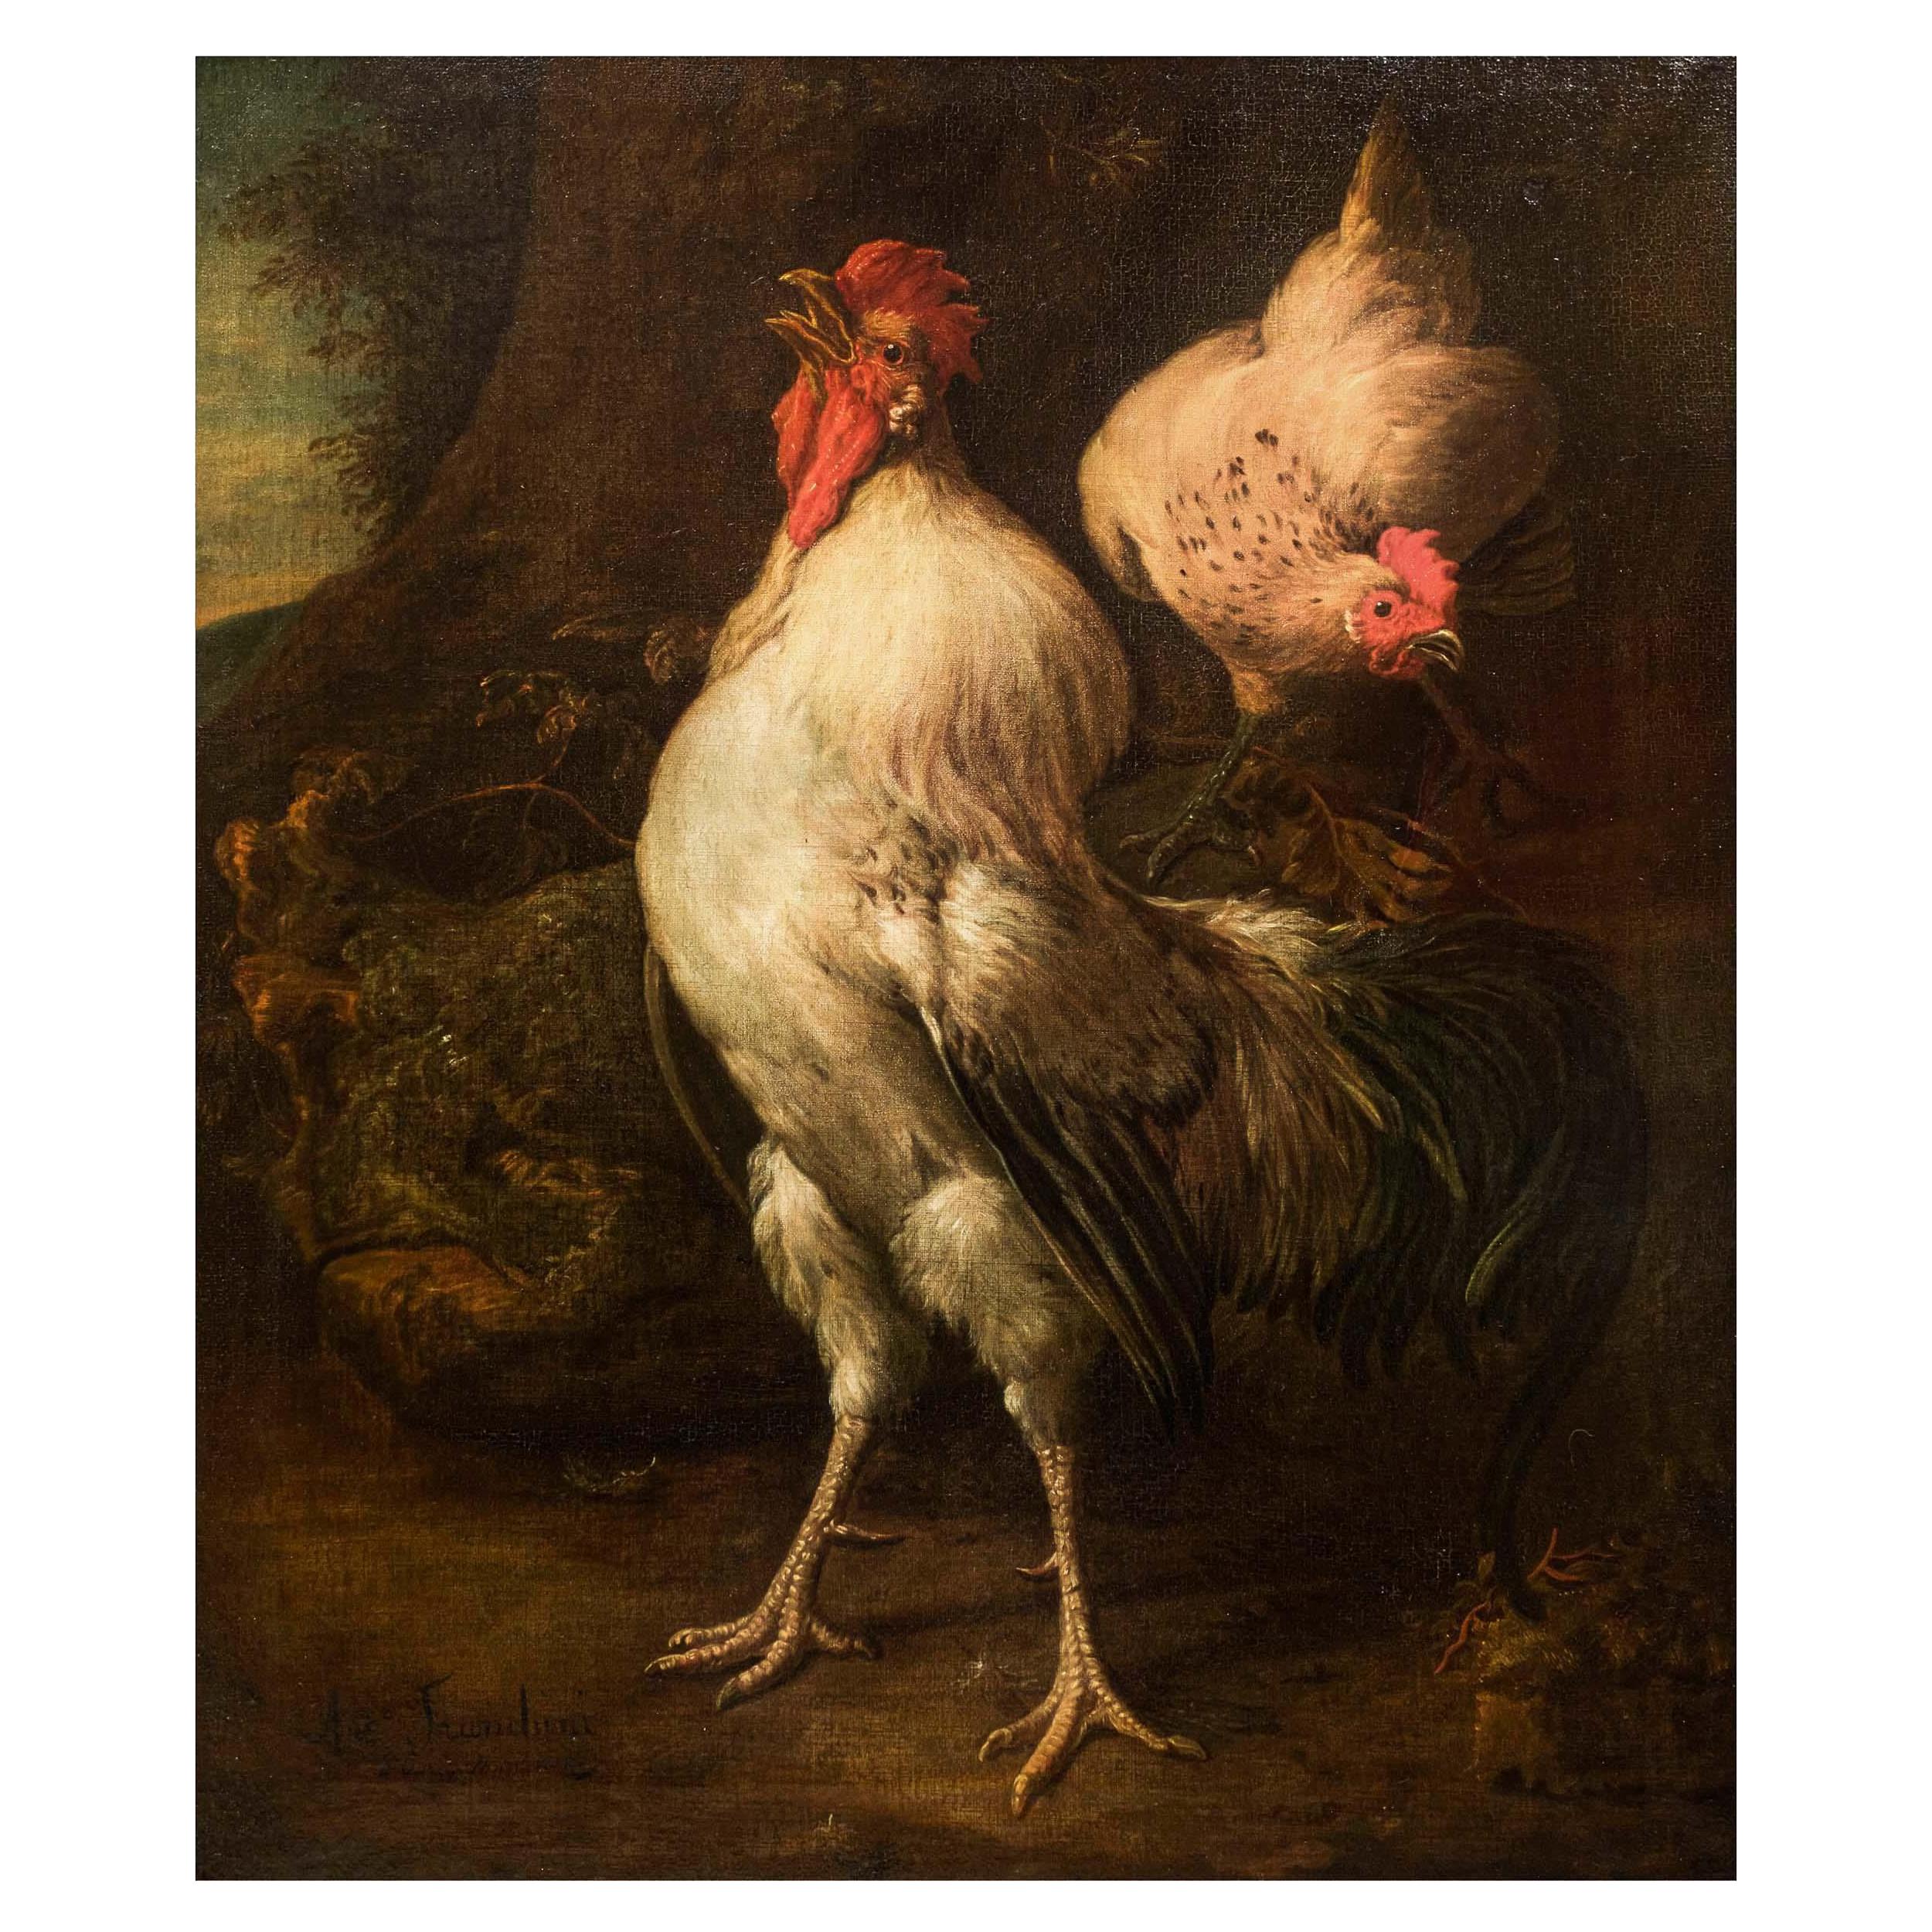 Antique Italian Painting of Rooster "Heralding the Dawn" by Antonio  Franchini For Sale at 1stDibs